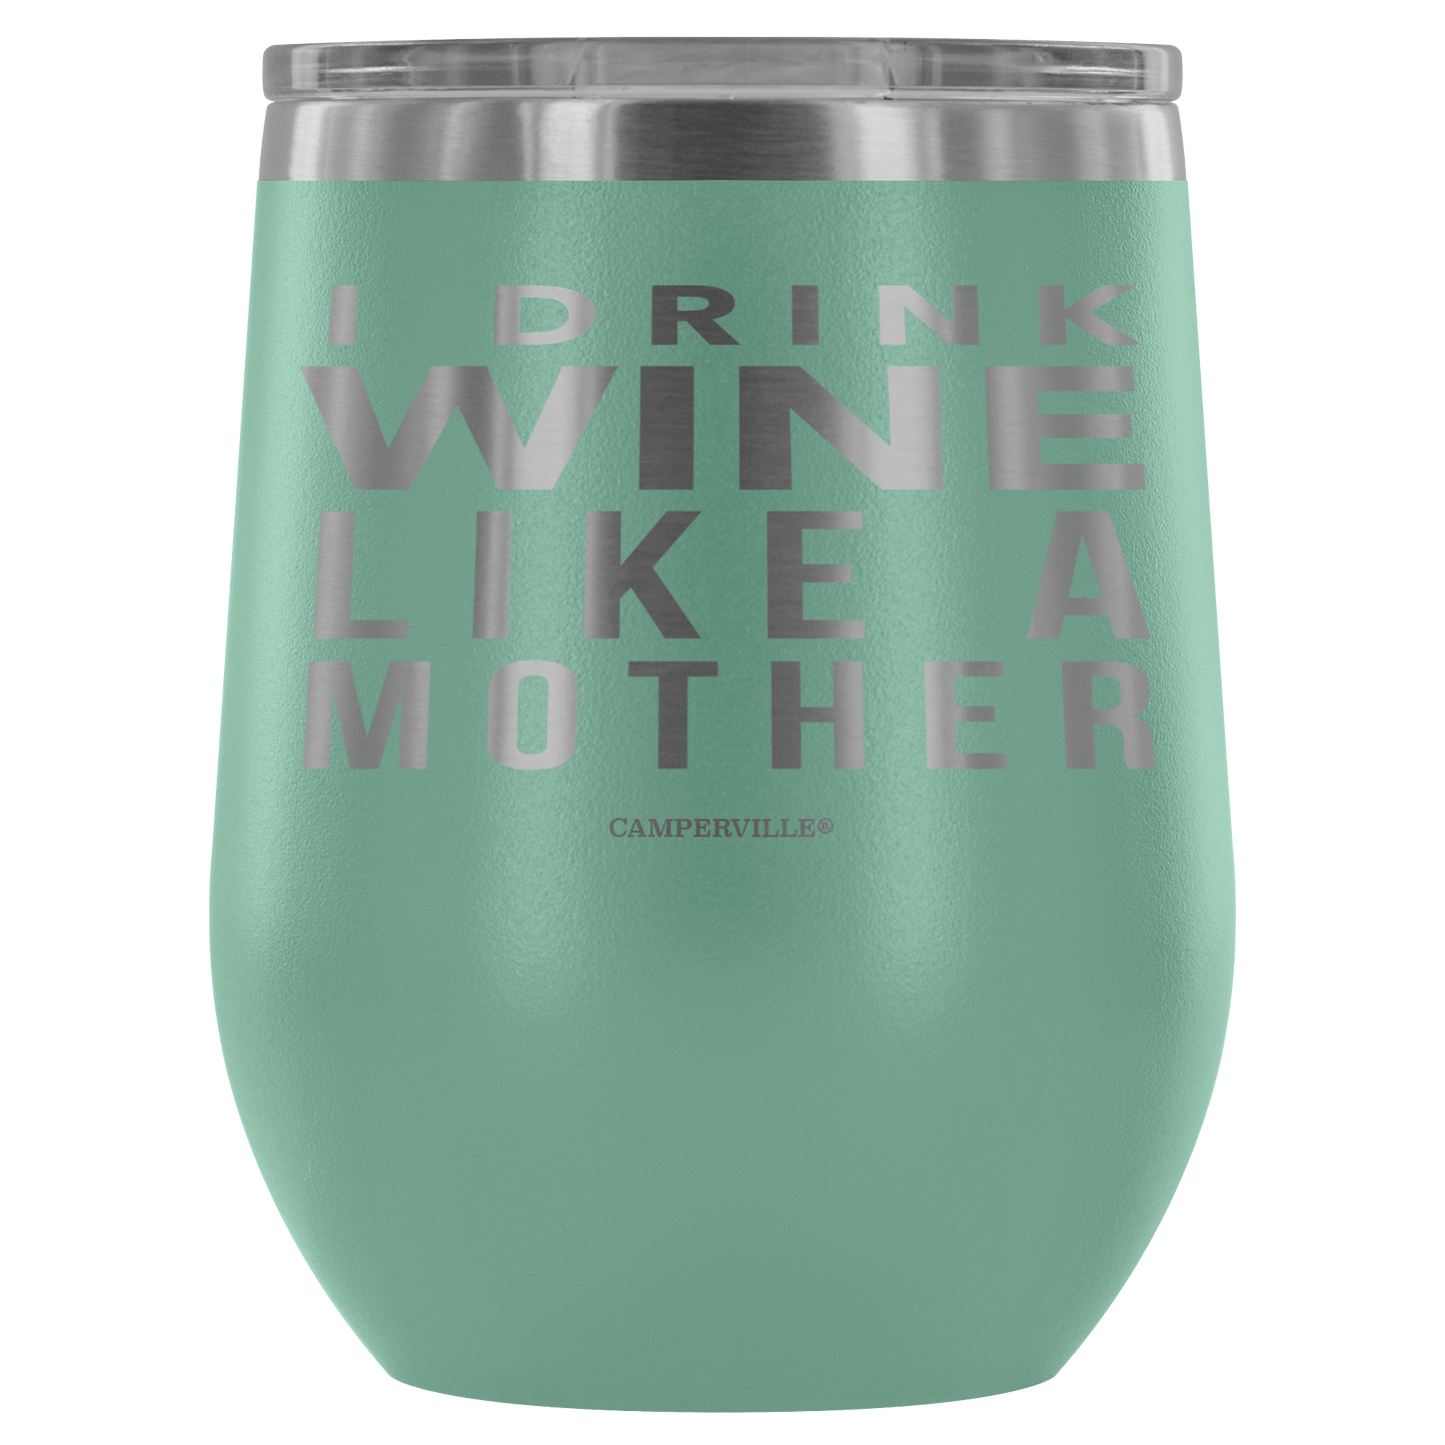 "I Drink Wine Like A Mother" Stemless Wine Cup